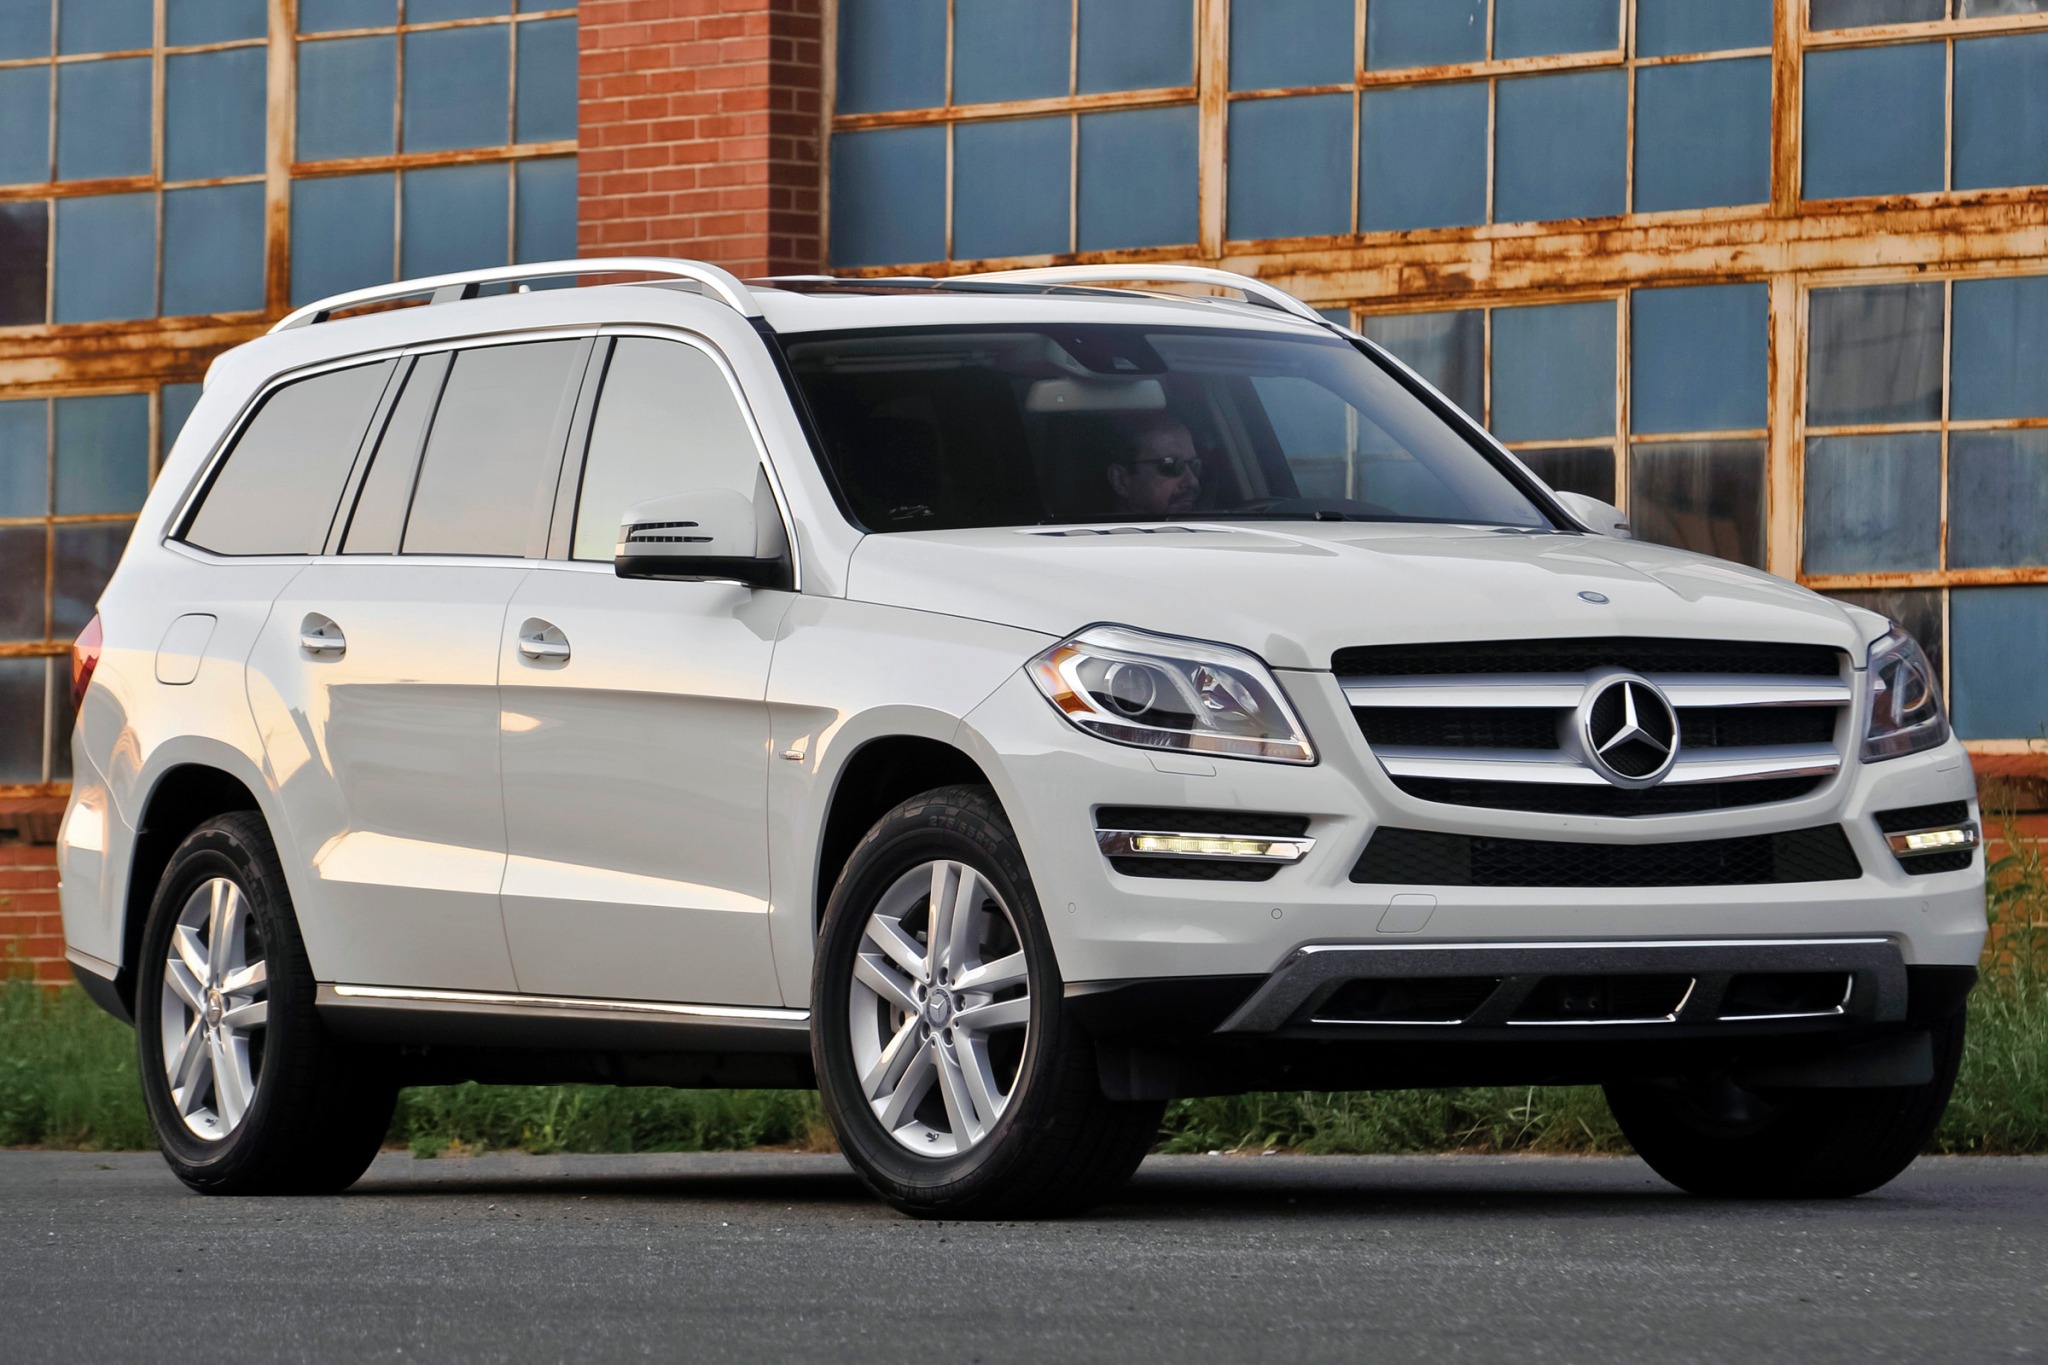 2015 Mercedes-Benz GL-Class VIN Number Search - AutoDetective